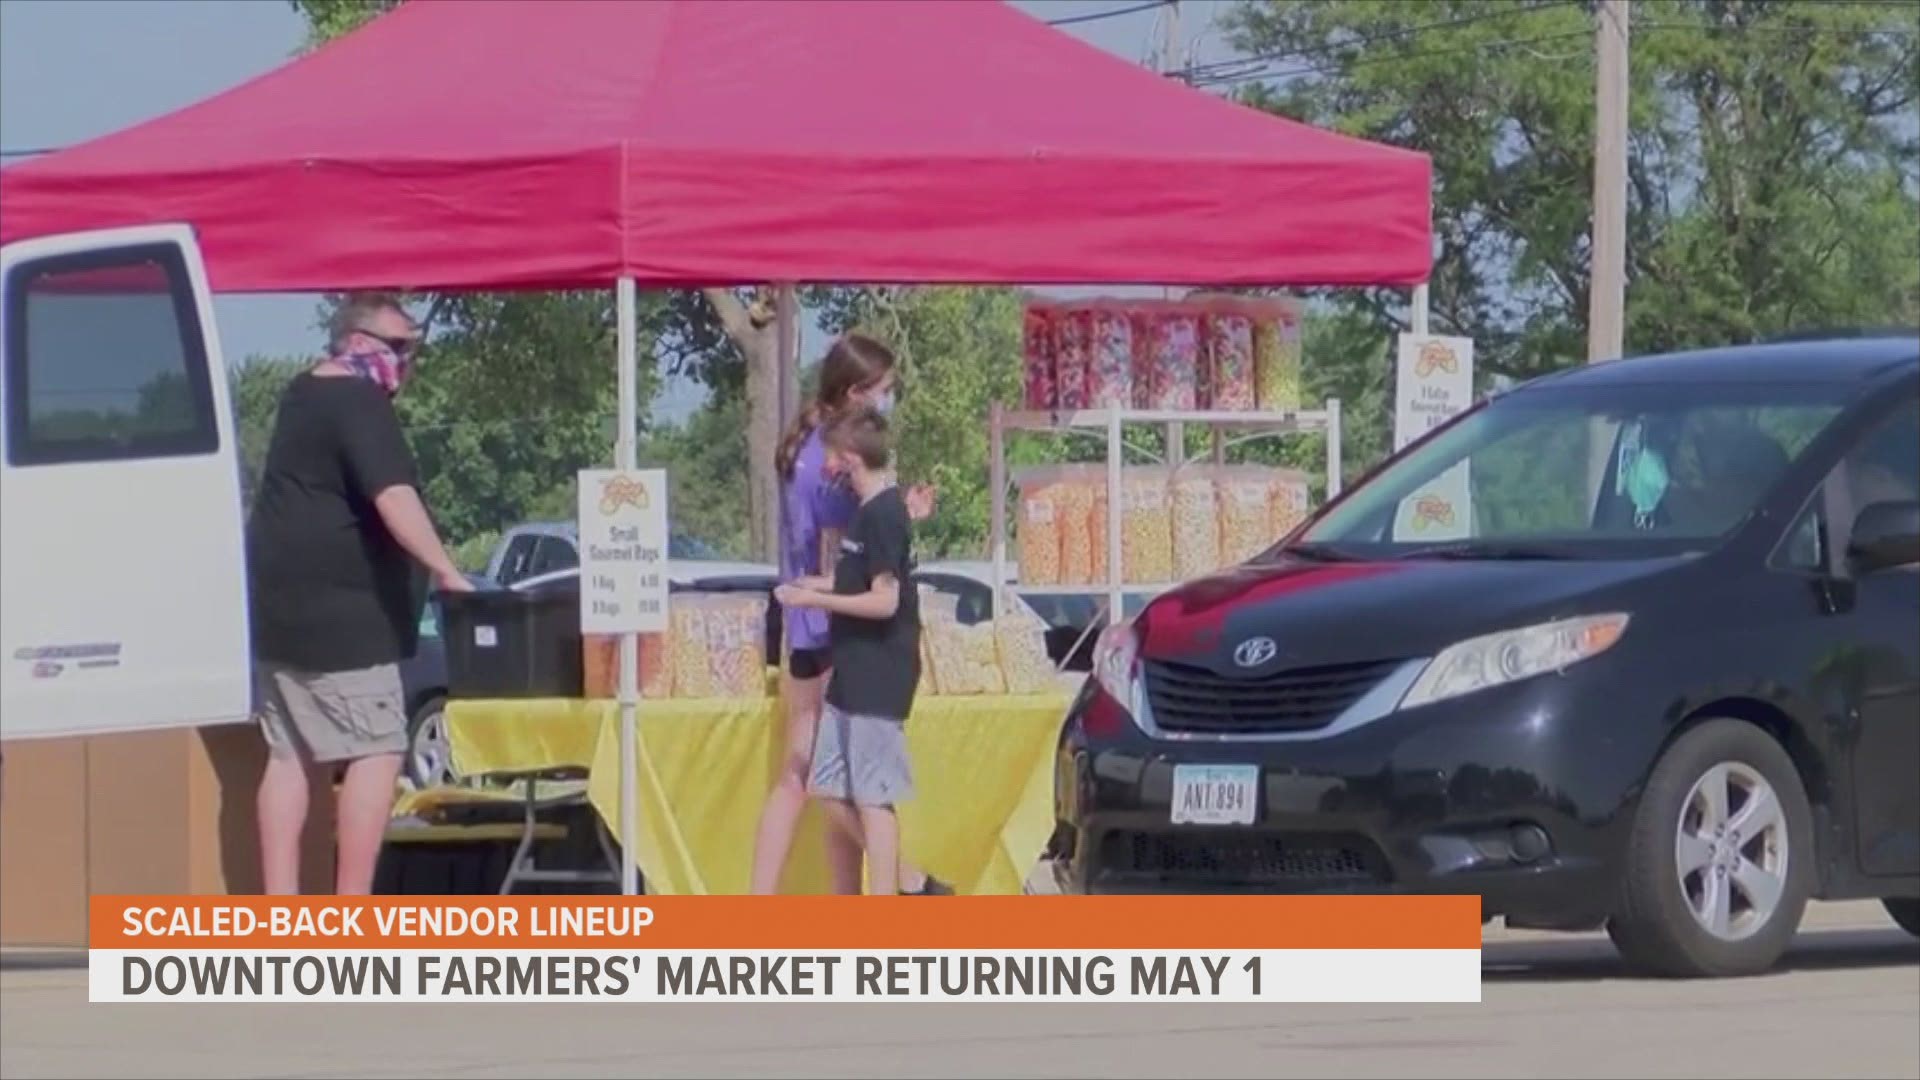 The Downtown Farmers' Market will return as a limited in-person event beginning on May 1, 2021.